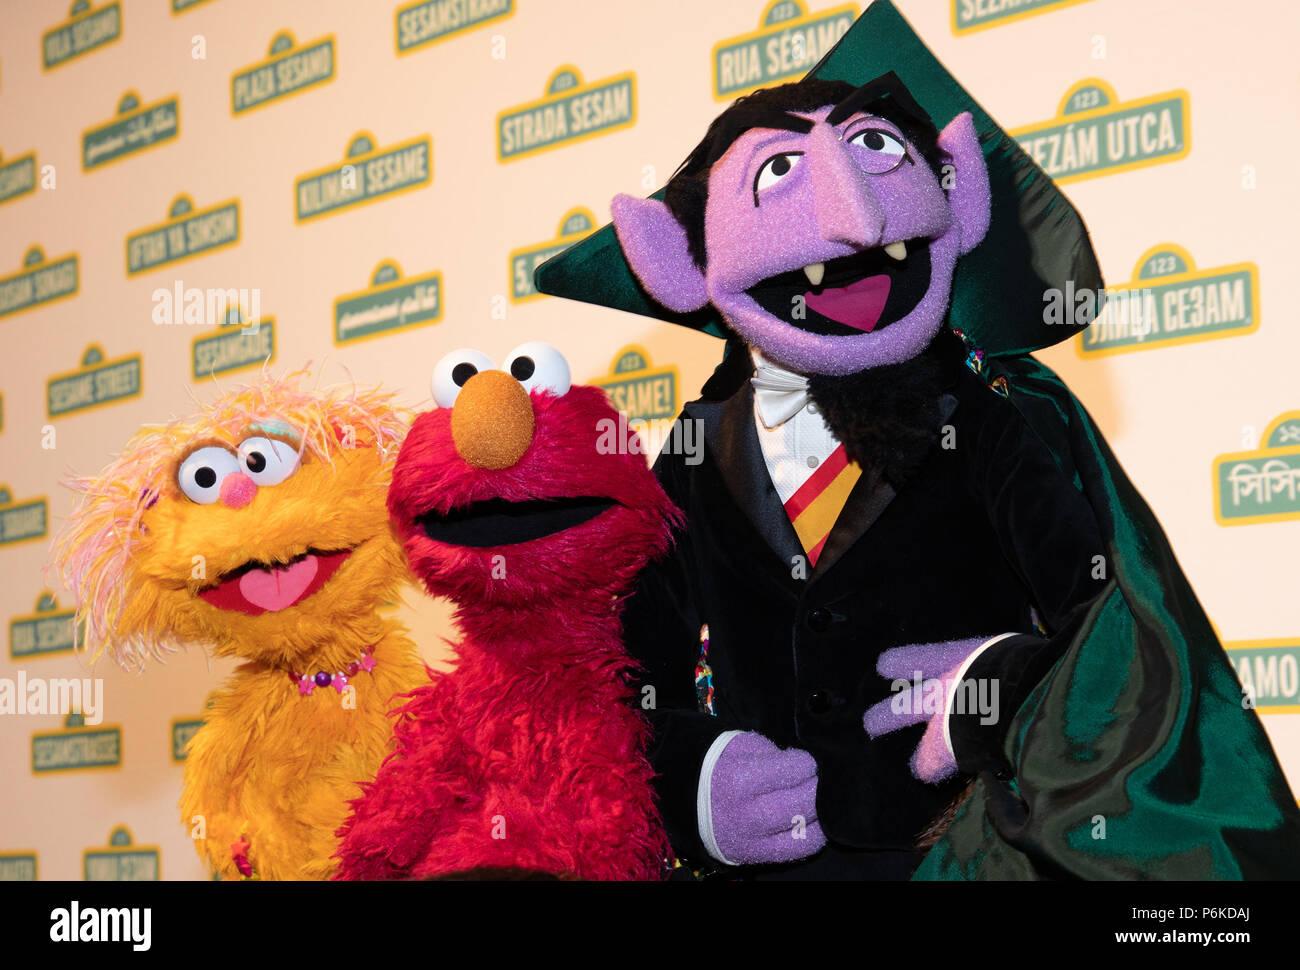 Sesame Workshop S 16th Annual Benefit Gala Featuring Muppet Zoe